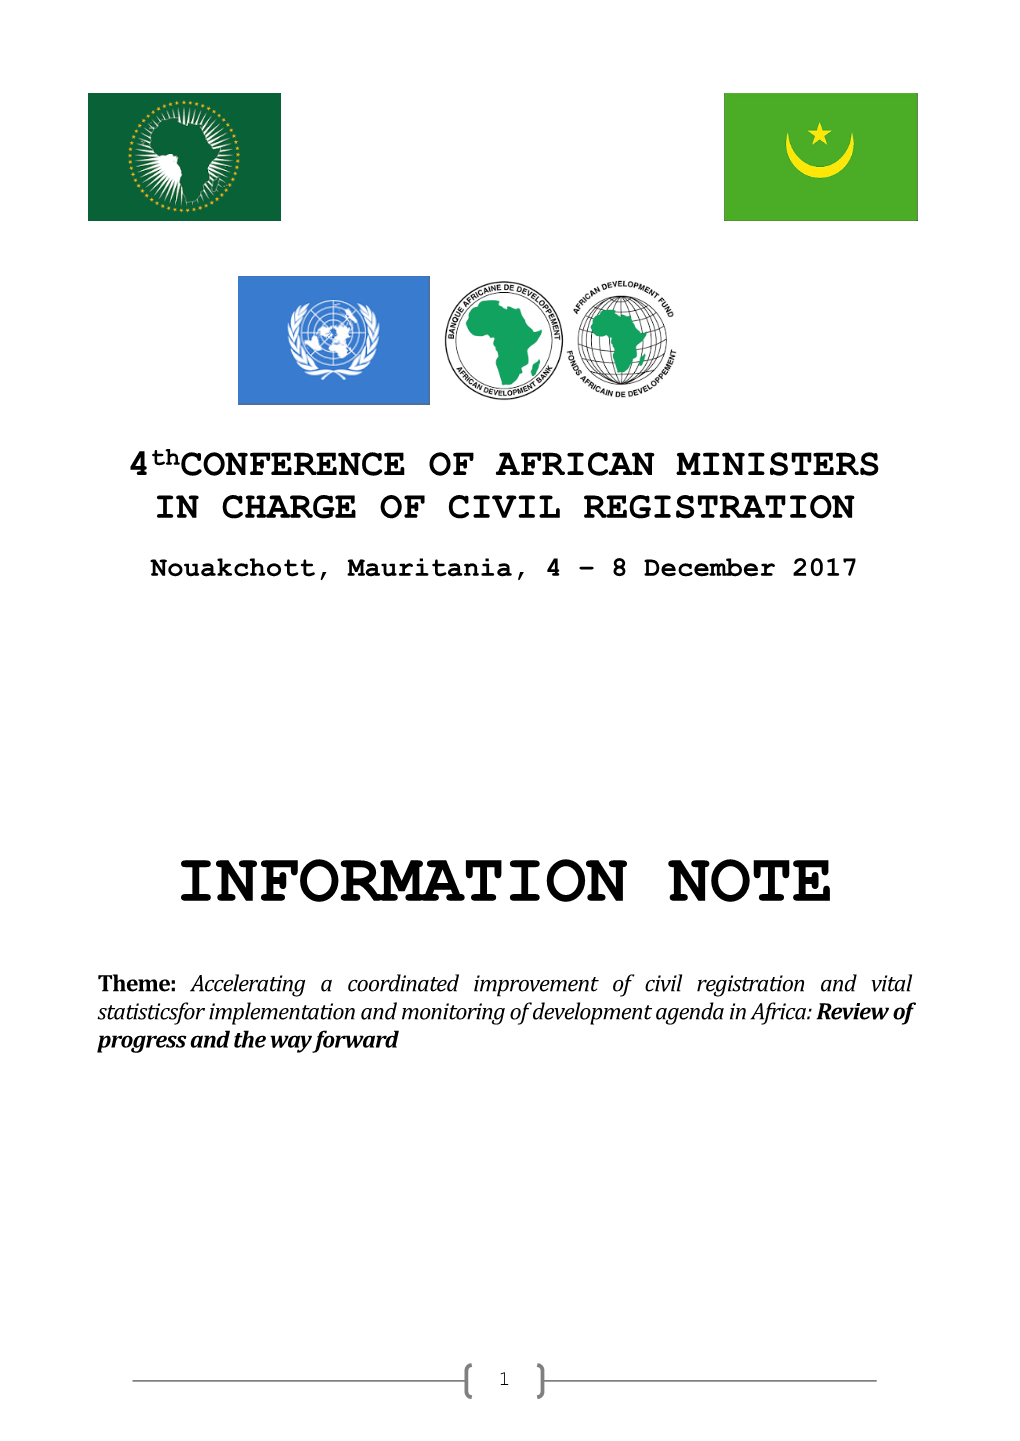 Information Note Mauritania